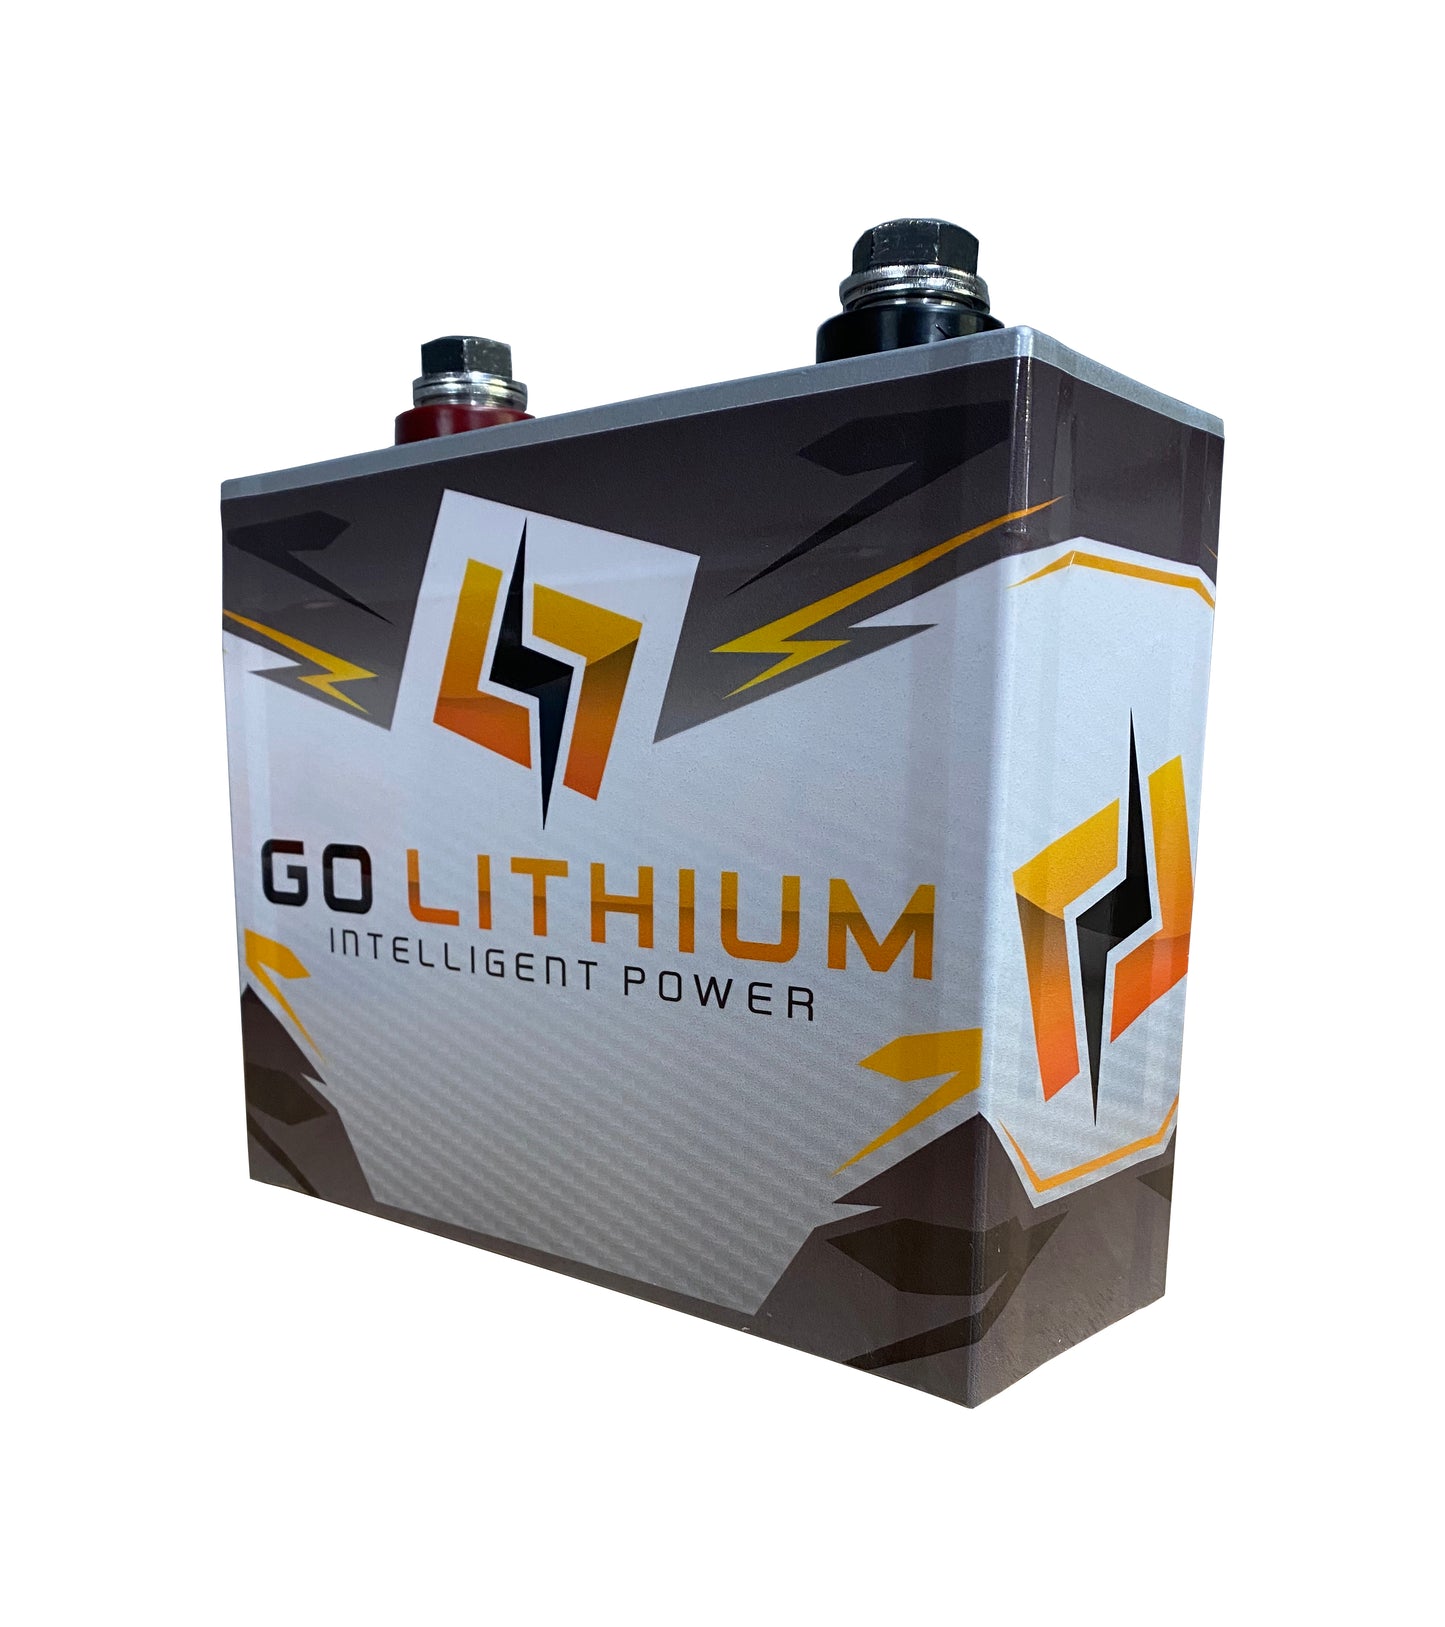 GO Lithium Dual 16v Battery & Charger Package